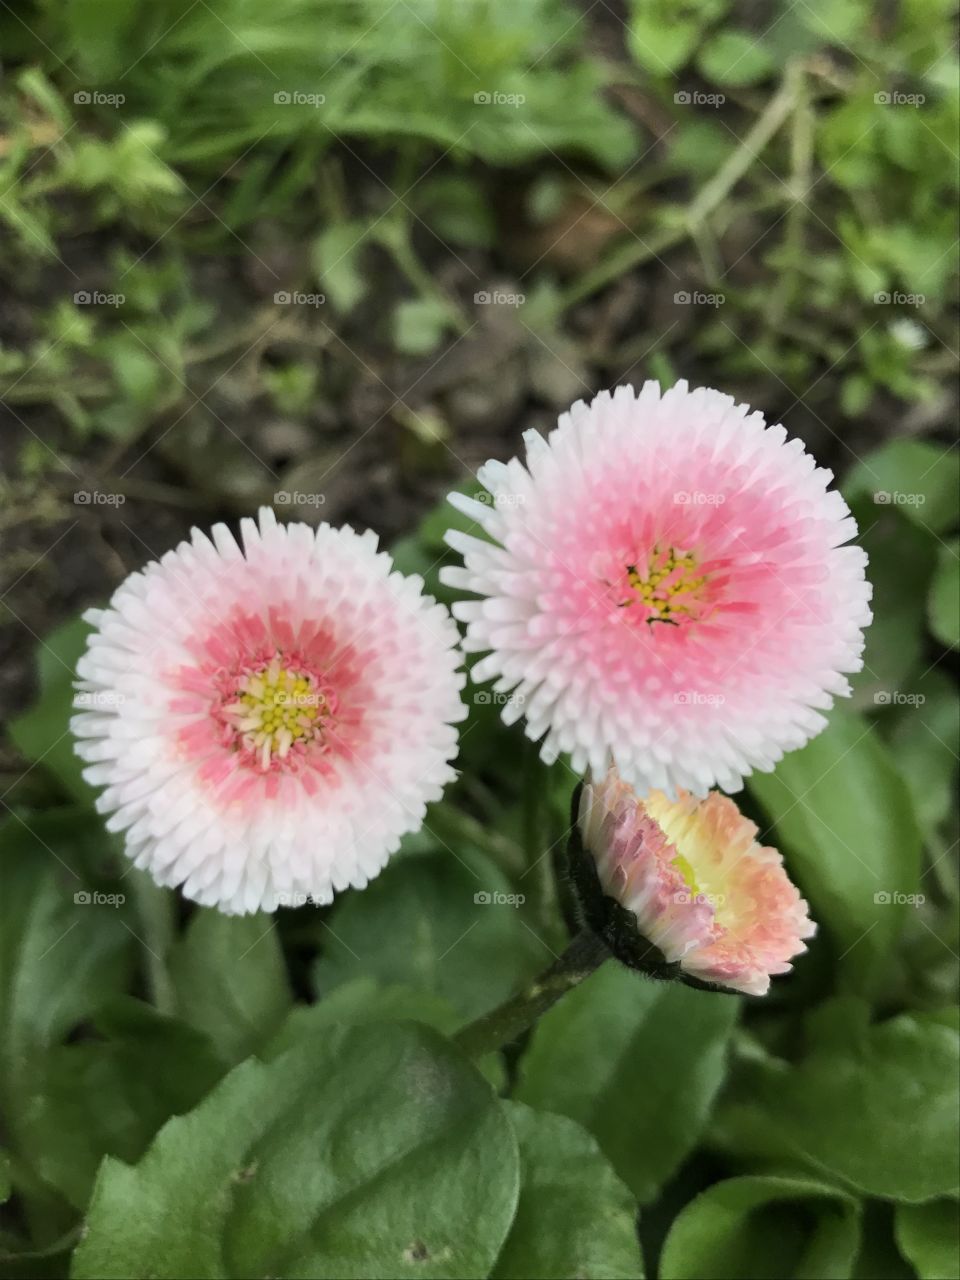 Little white and pink flowers.